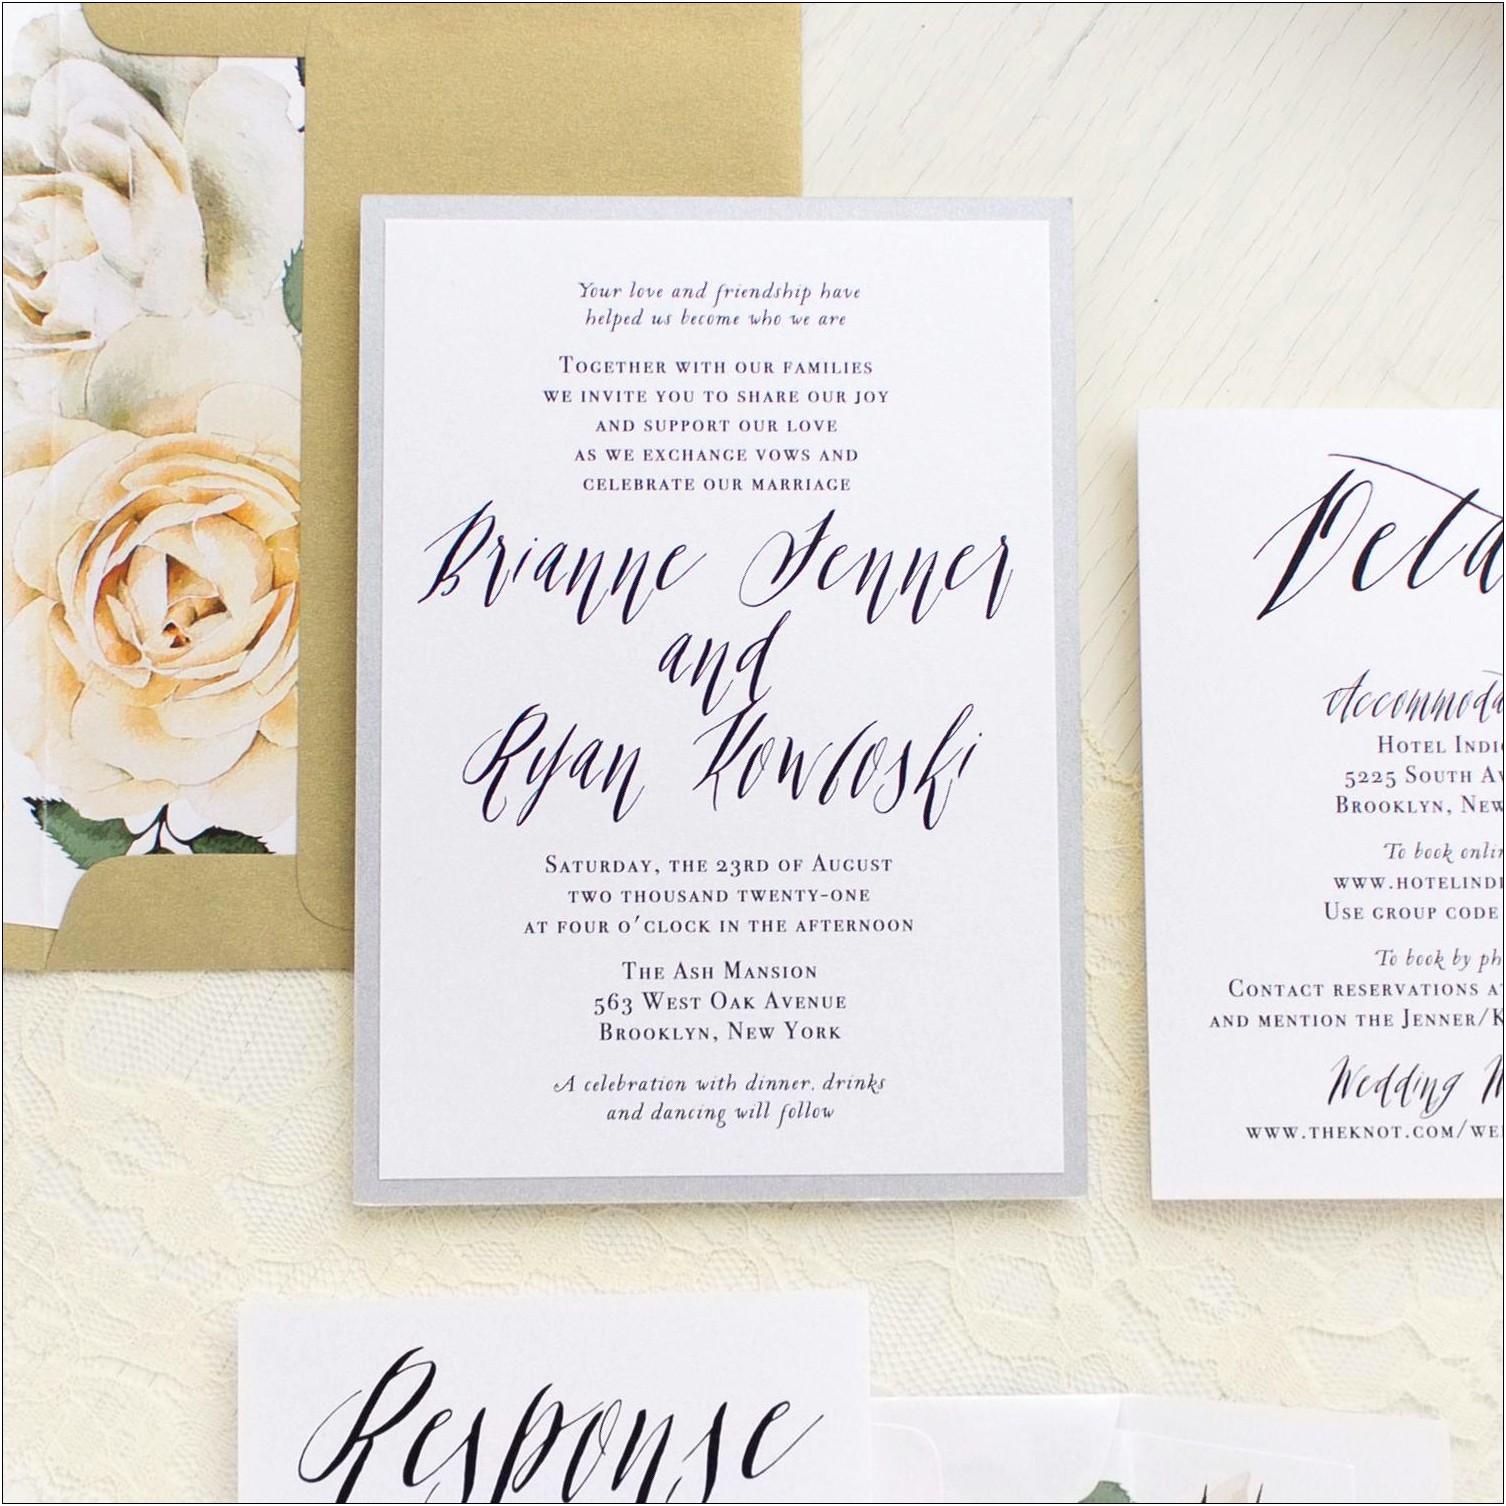 Best All Caps Font For Wedding Invitation